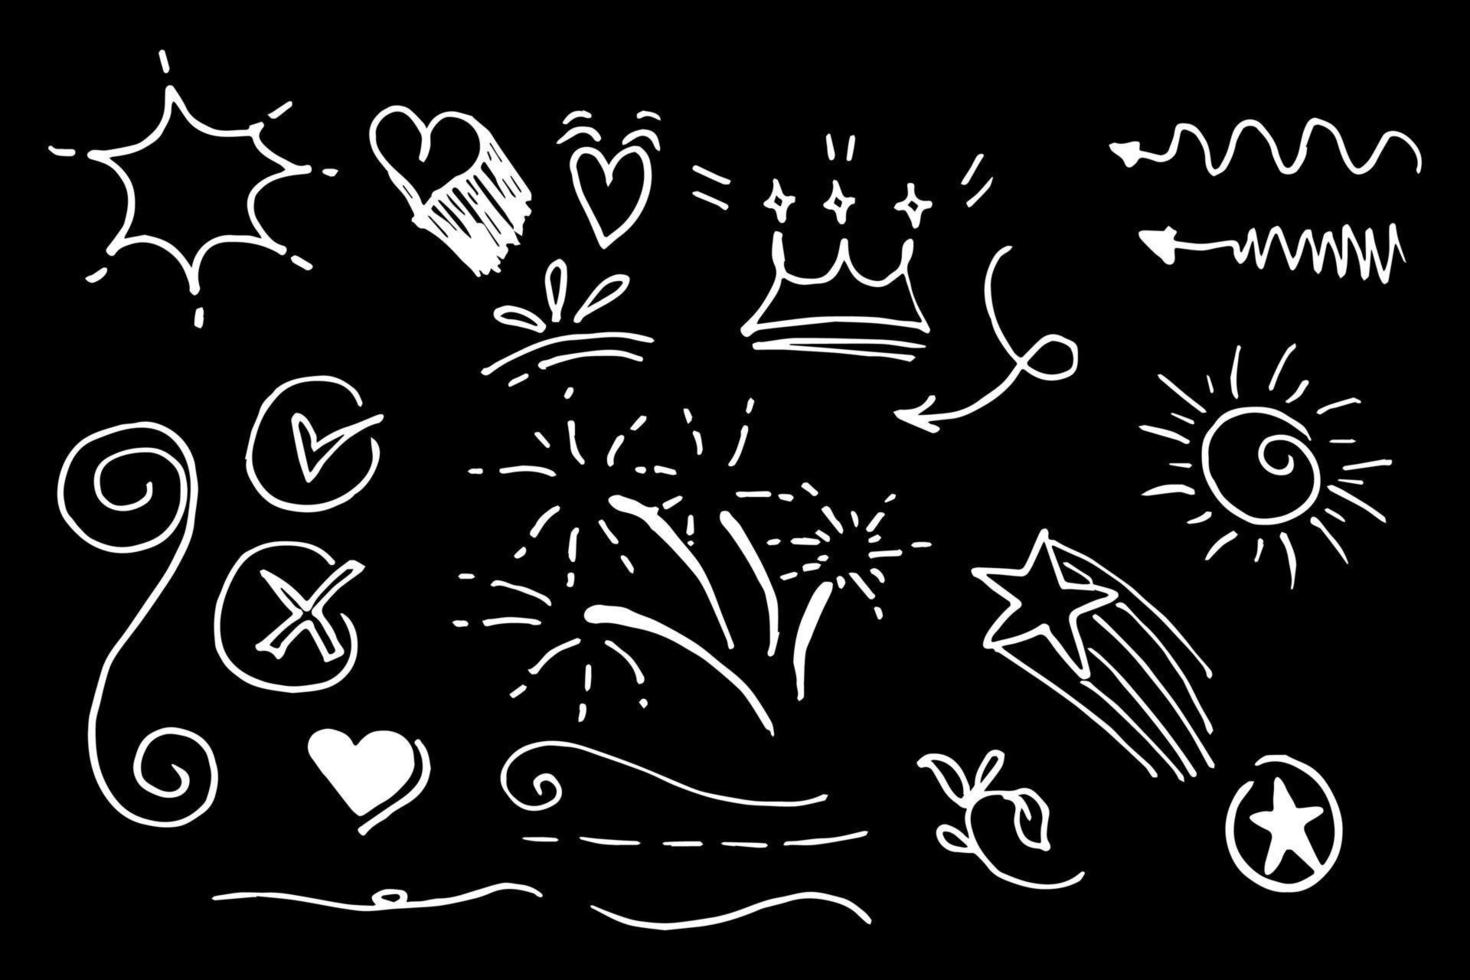 Vector doodle collection of design element. curly swishes, swoops, swirl, arrow, heart, love, crown, flower, star, firework, highlight text and emphasis element. use for concept design